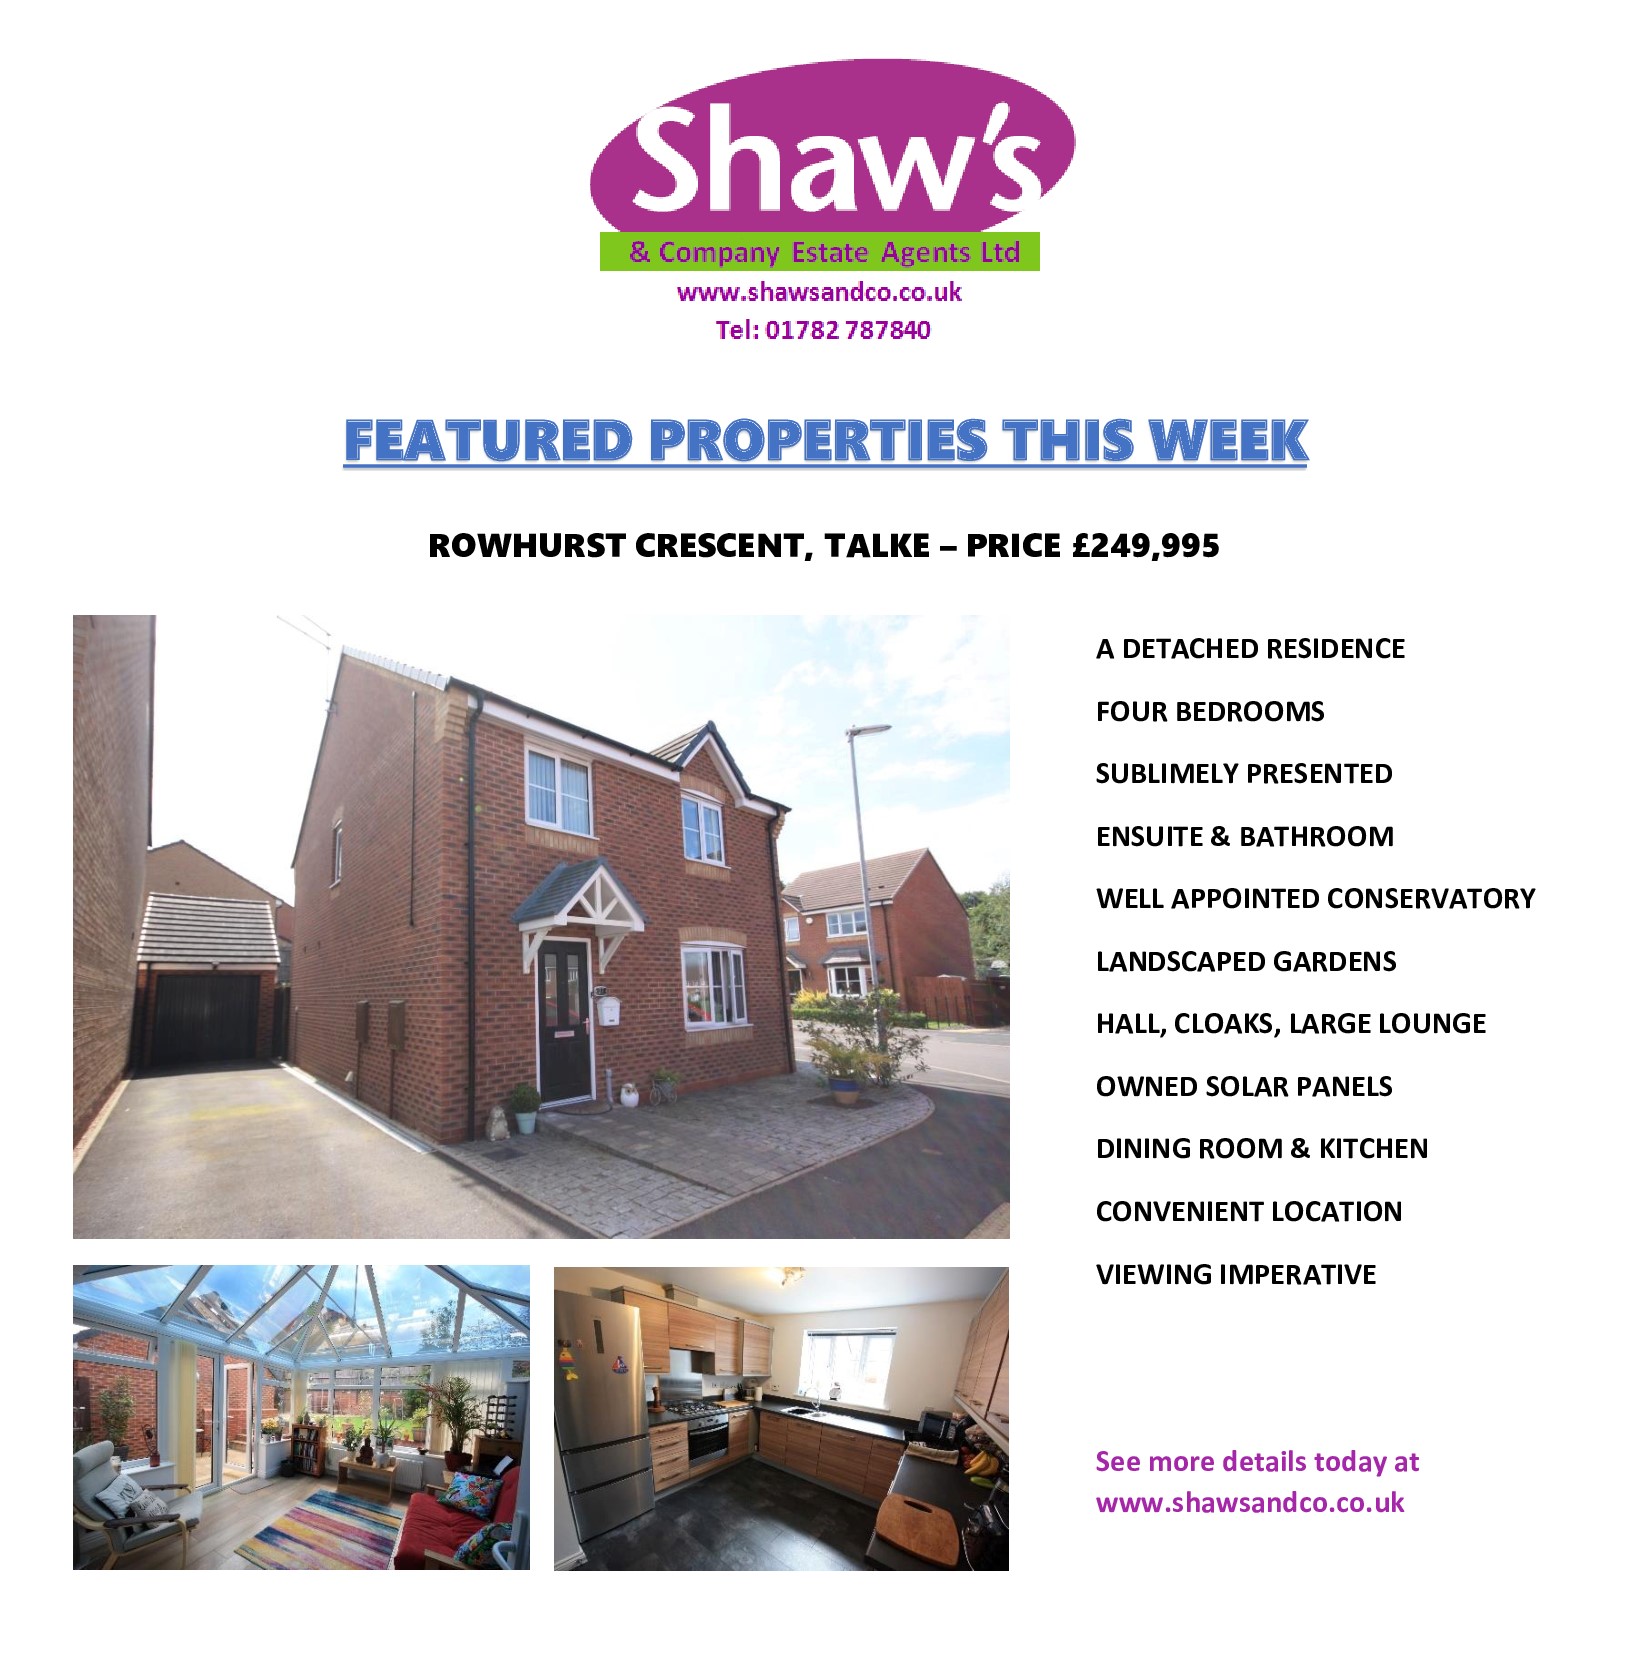 FEATURED PROPERTIES OF THE WEEK!